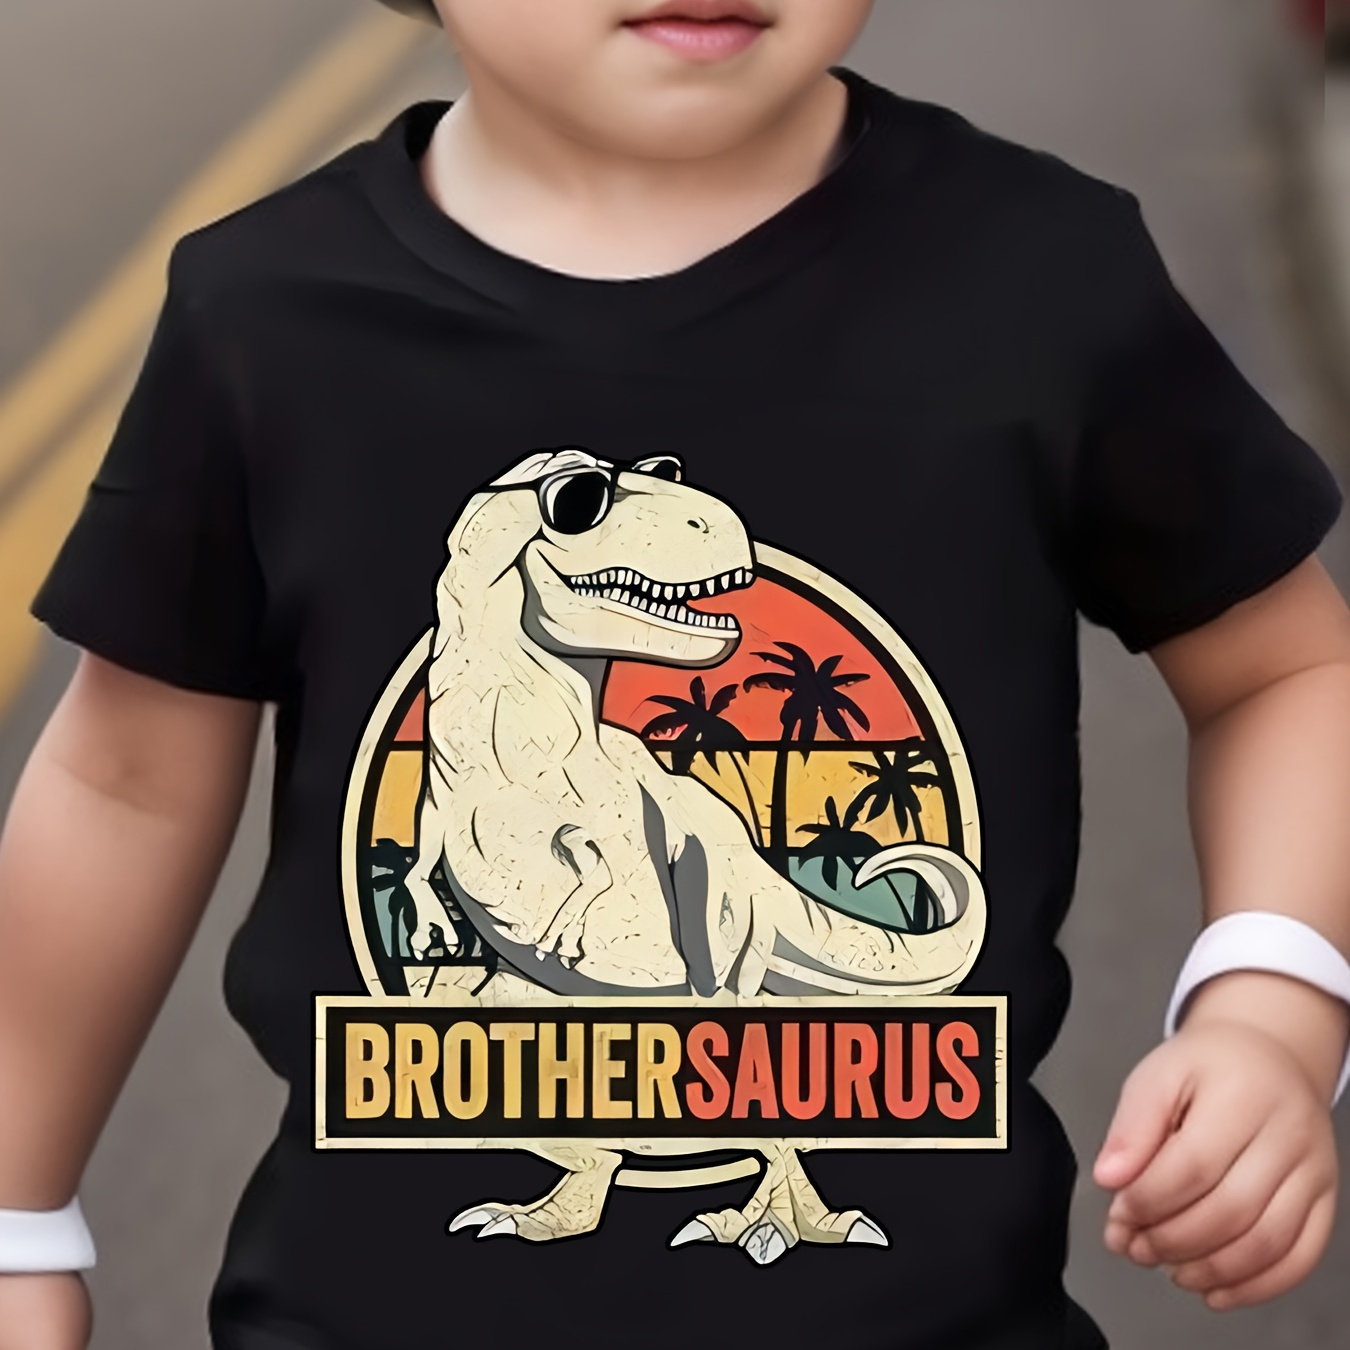 

Dinosaur Graphic & Big Brother Print Tee Tops For Boys, Pregnancy Announcements New Sibling Gifts Kids T-shirts